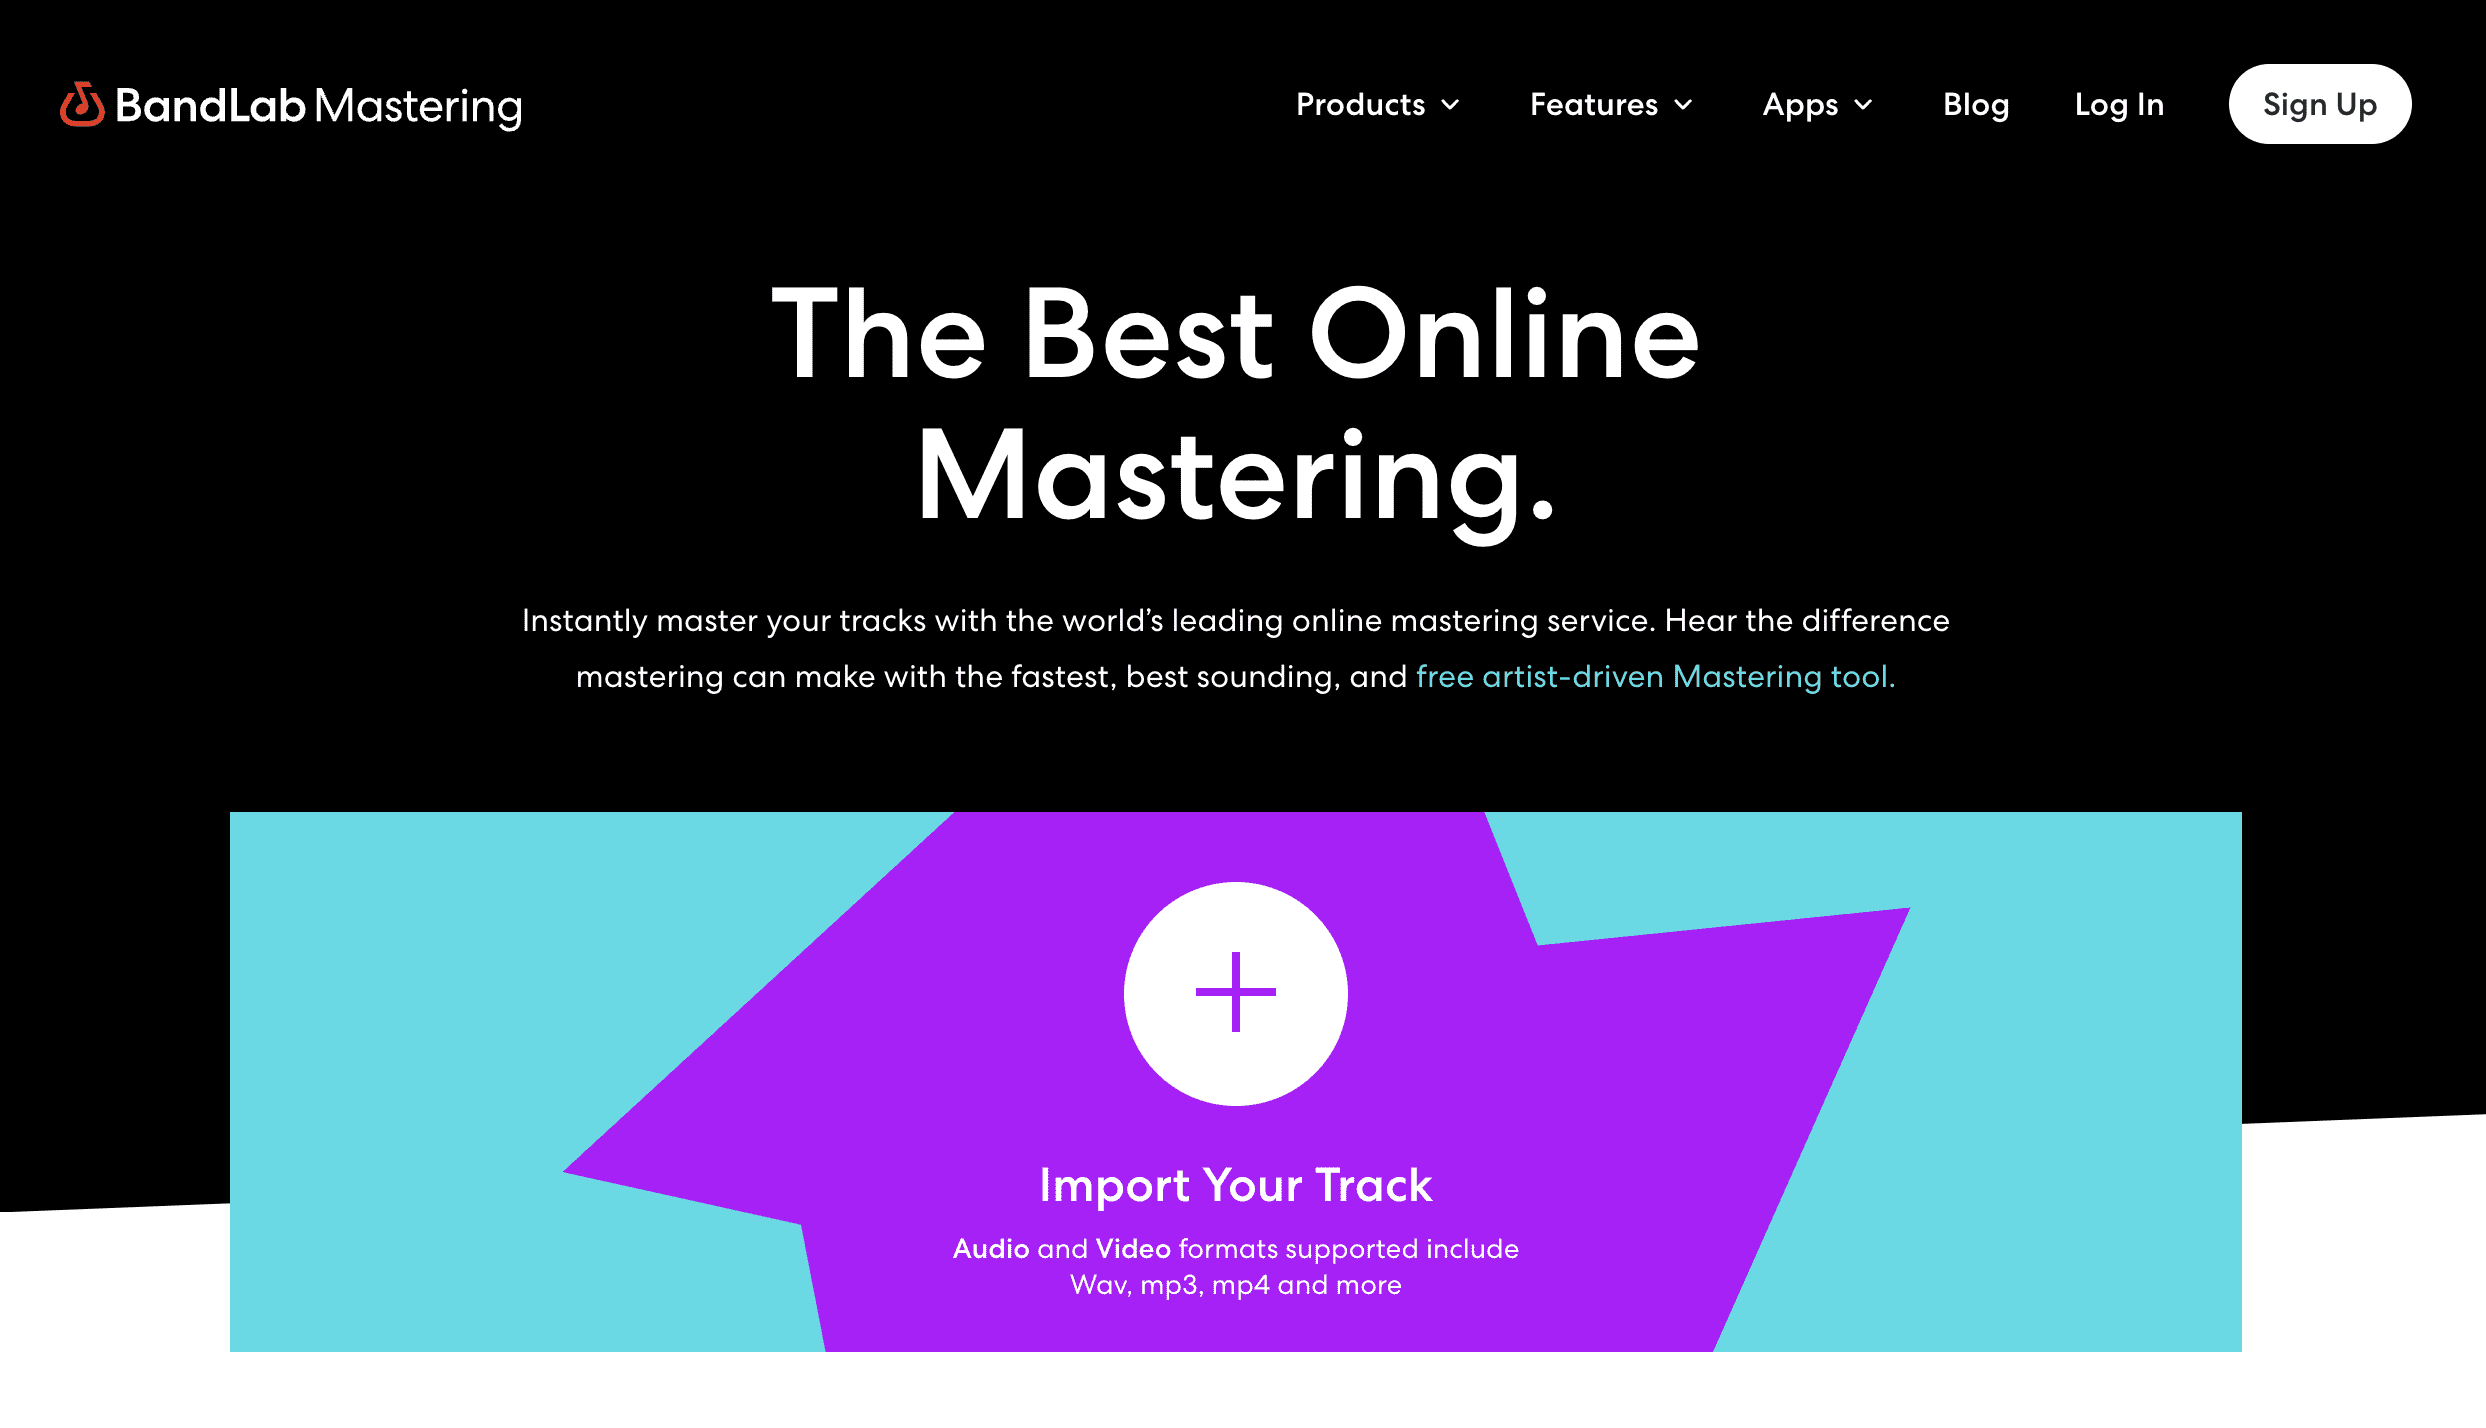 "The Best Online Mastering" on BandLab Mastering homepage with black, purple, blue, and white background